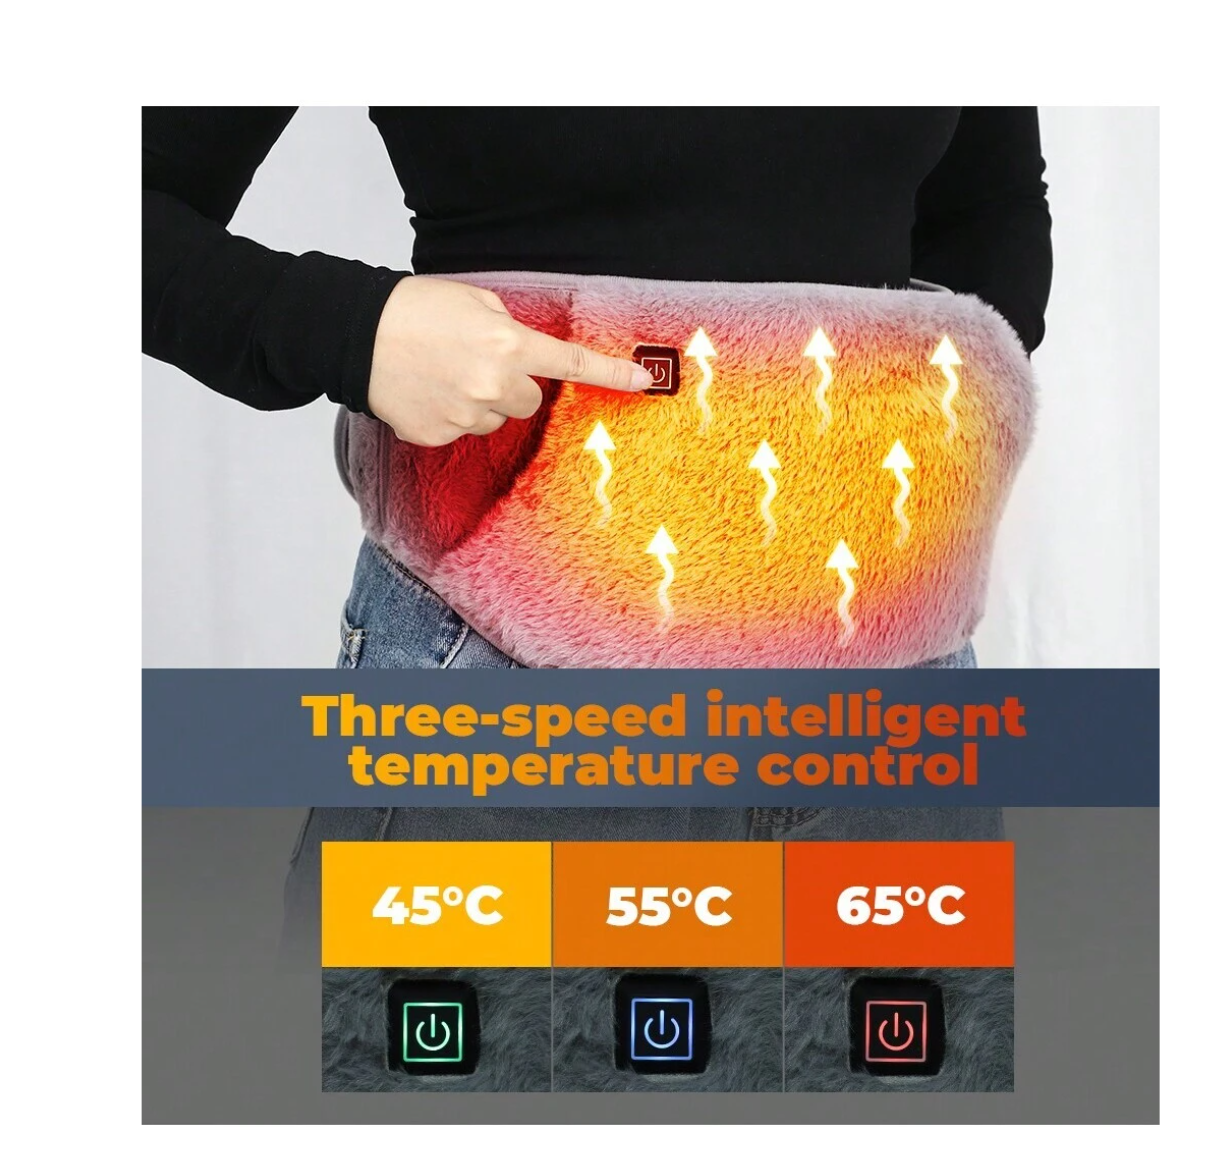 On-the-Go Warmth: Portable Cordless Heating Pad with Graphene Technology for Women and Girls – Fast, Versatile, and USB Rechargeable!